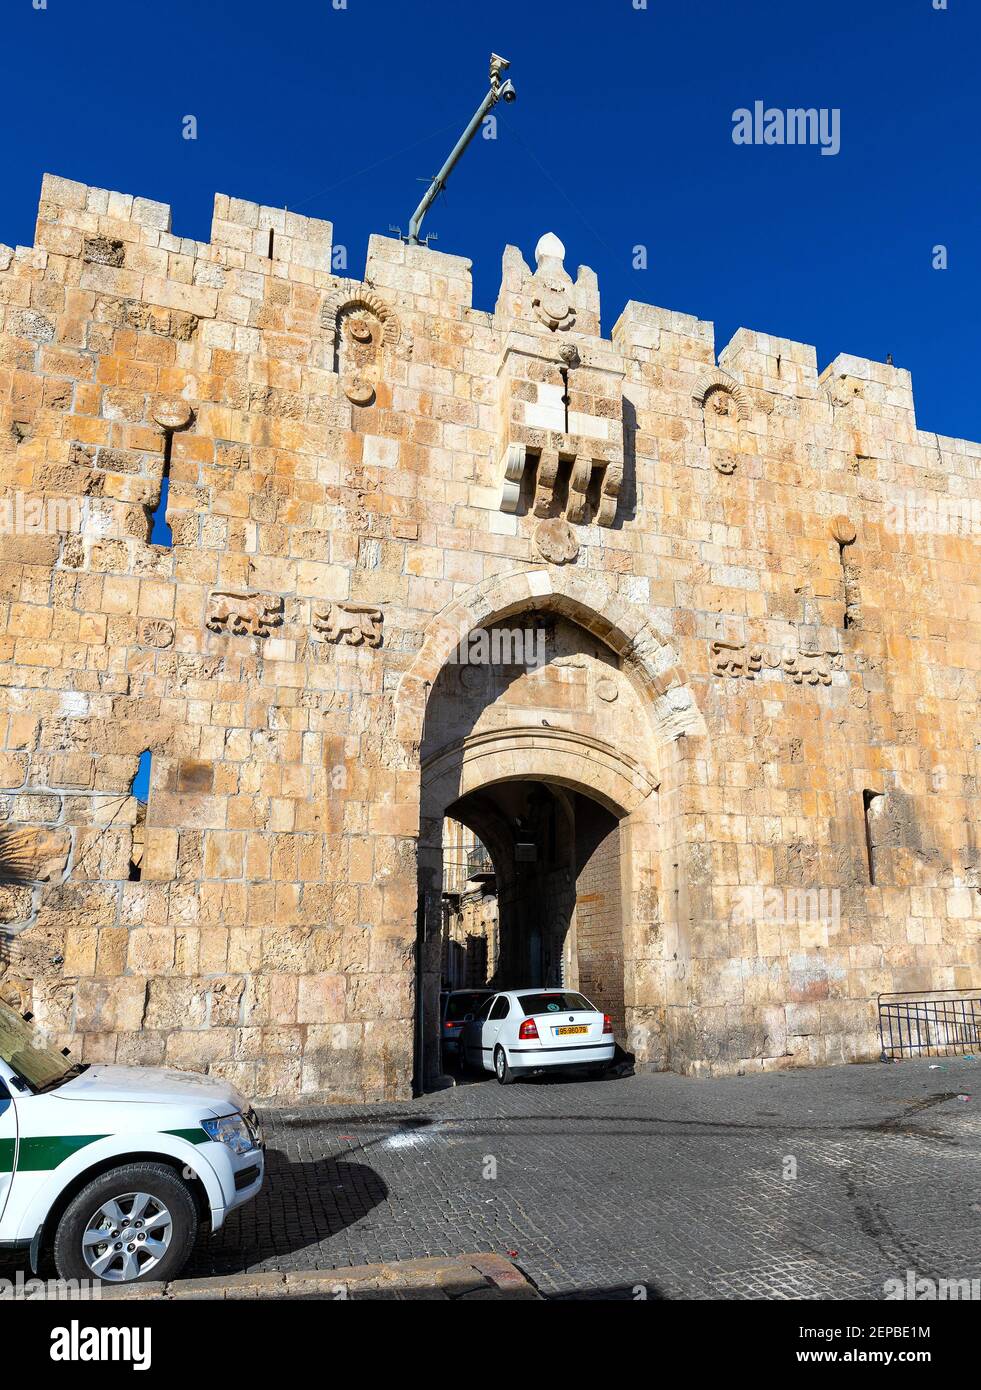 Jerusalem, Israel - October 12, 2017: Lions’ Gate, known also as St. Stephen's Gate or Sheep Gate, in eastern side of Temple Mount walls in Jerusalem Stock Photo